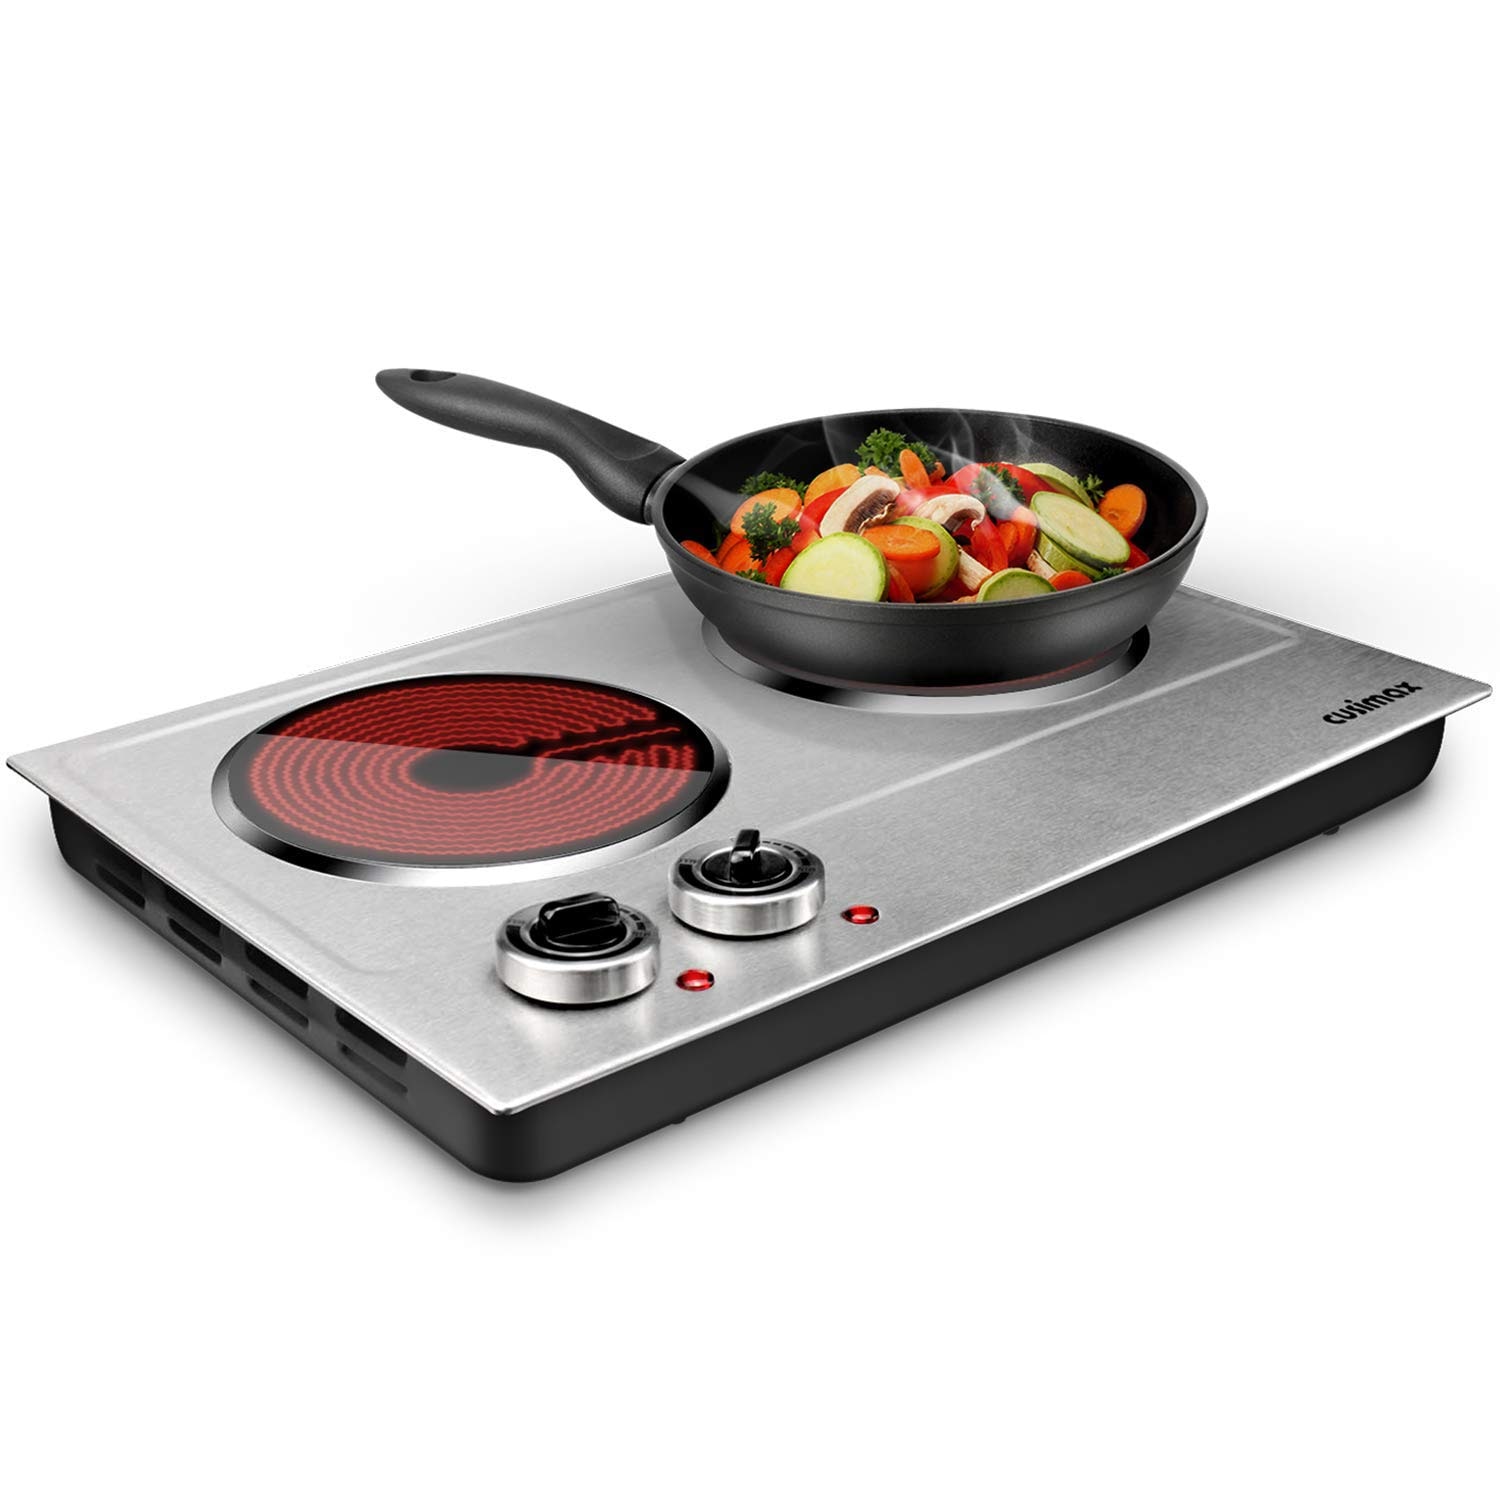 CUSIMAX 1800W Double Hot Plate for Cooking Double Burners Electric  Countertop Burner Cast Iron Hot Plates Cooktop Stainless Steel Silver